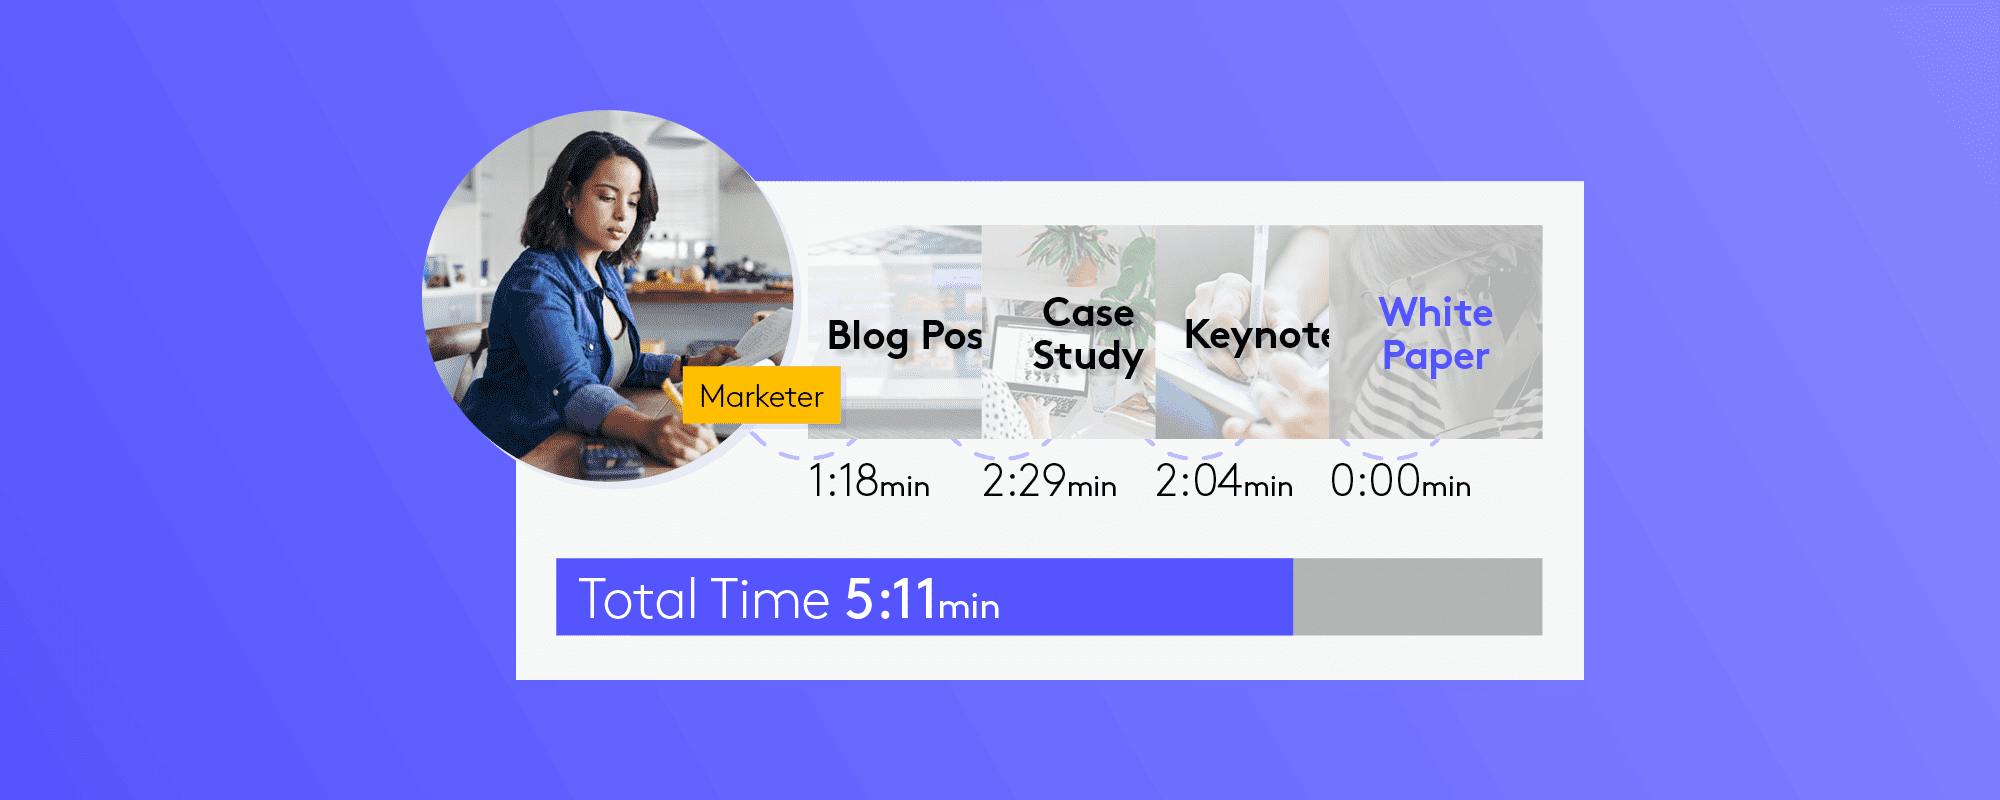 PathFactory is able to aggregate engagement time from multiple content types in one session.